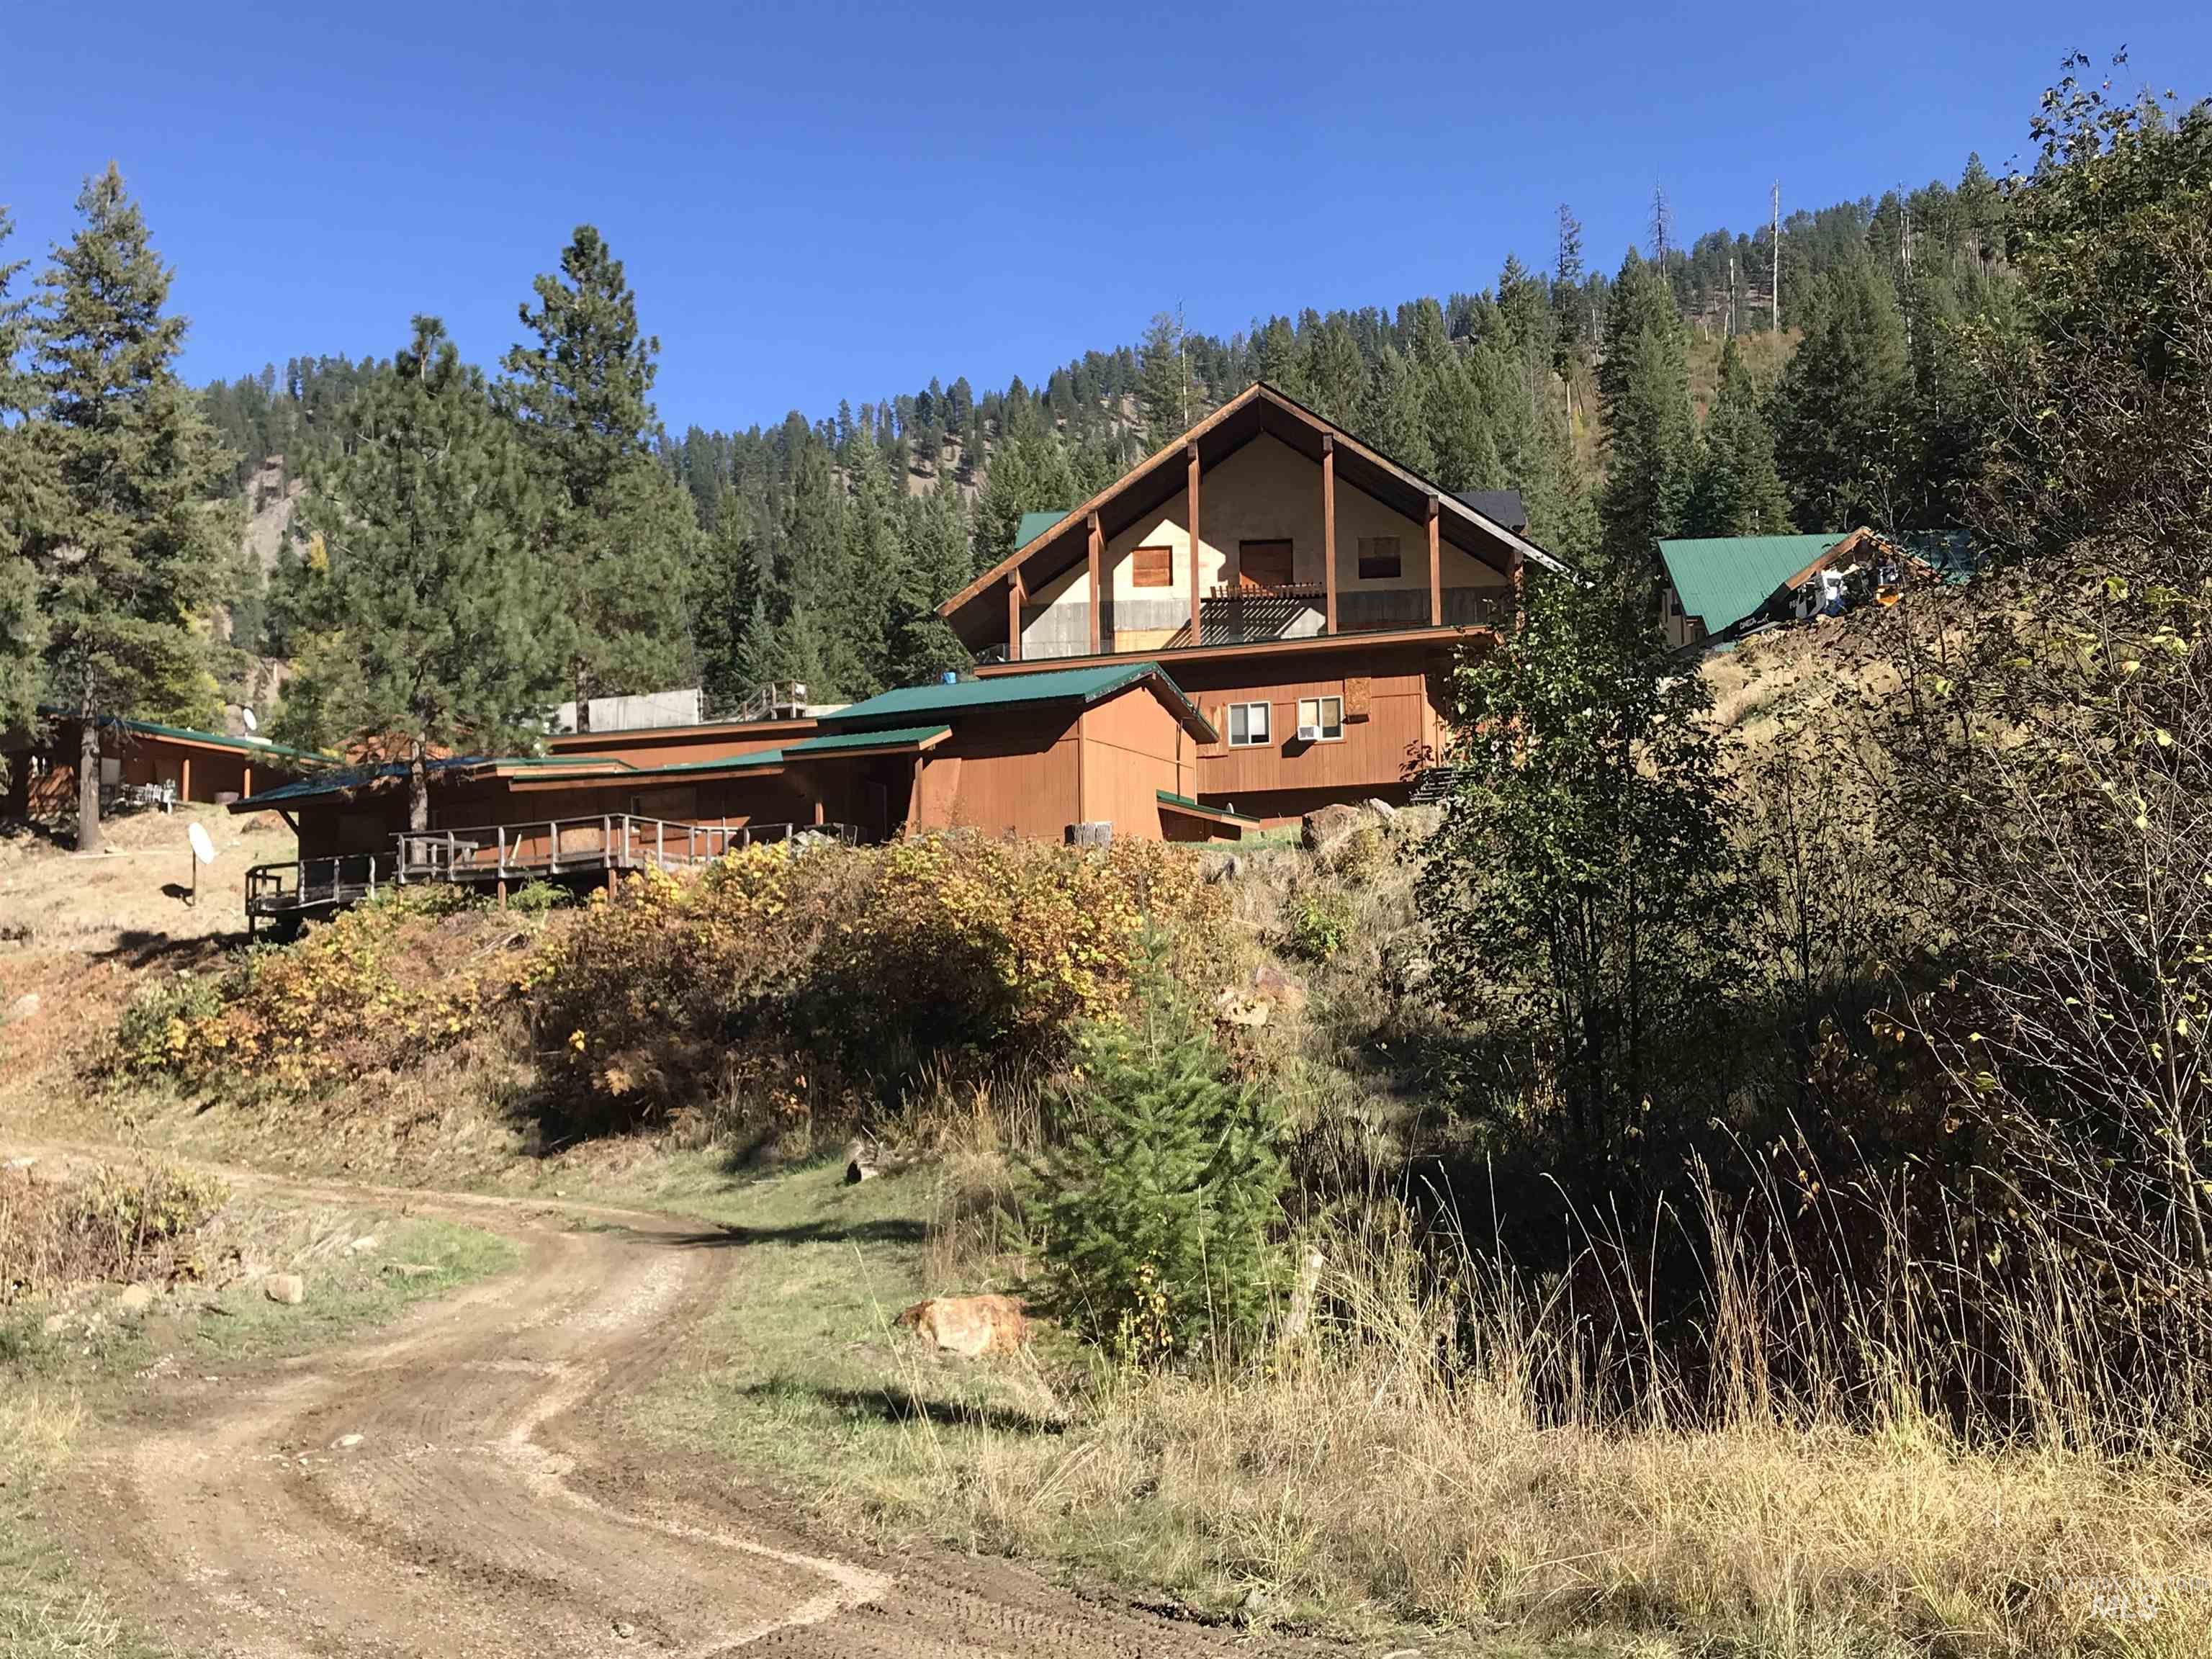 1850 Forest Service Rd # 318, Riggins, Idaho 83549, Business/Commercial For Sale, Price $6,500,000,MLS 98895332